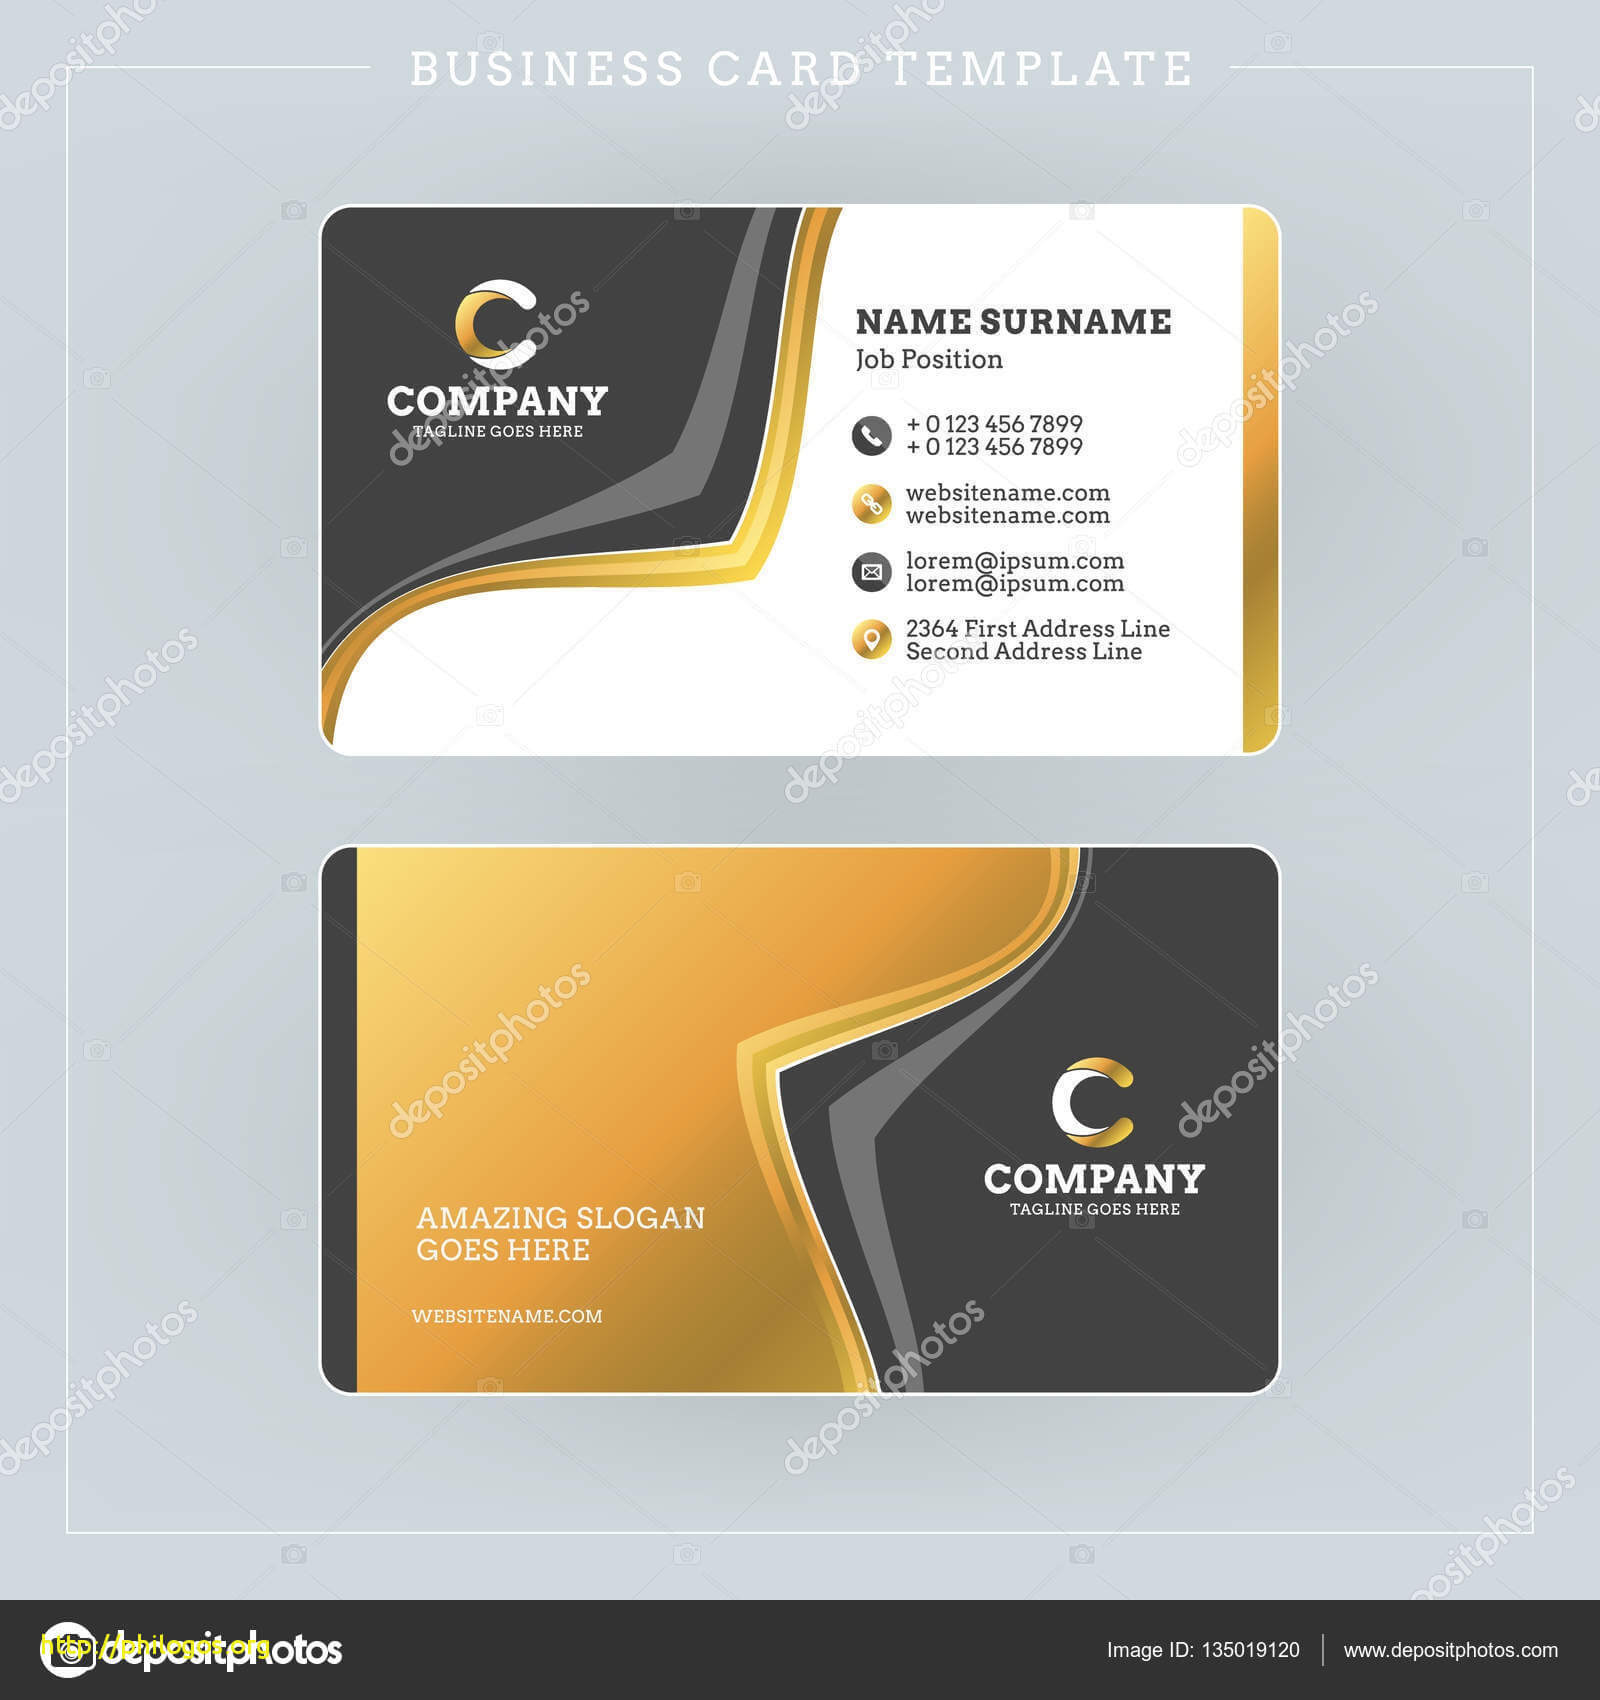 Double Sided Business Card Template Illustrator Awesome Inside Double Sided Business Card Template Illustrator